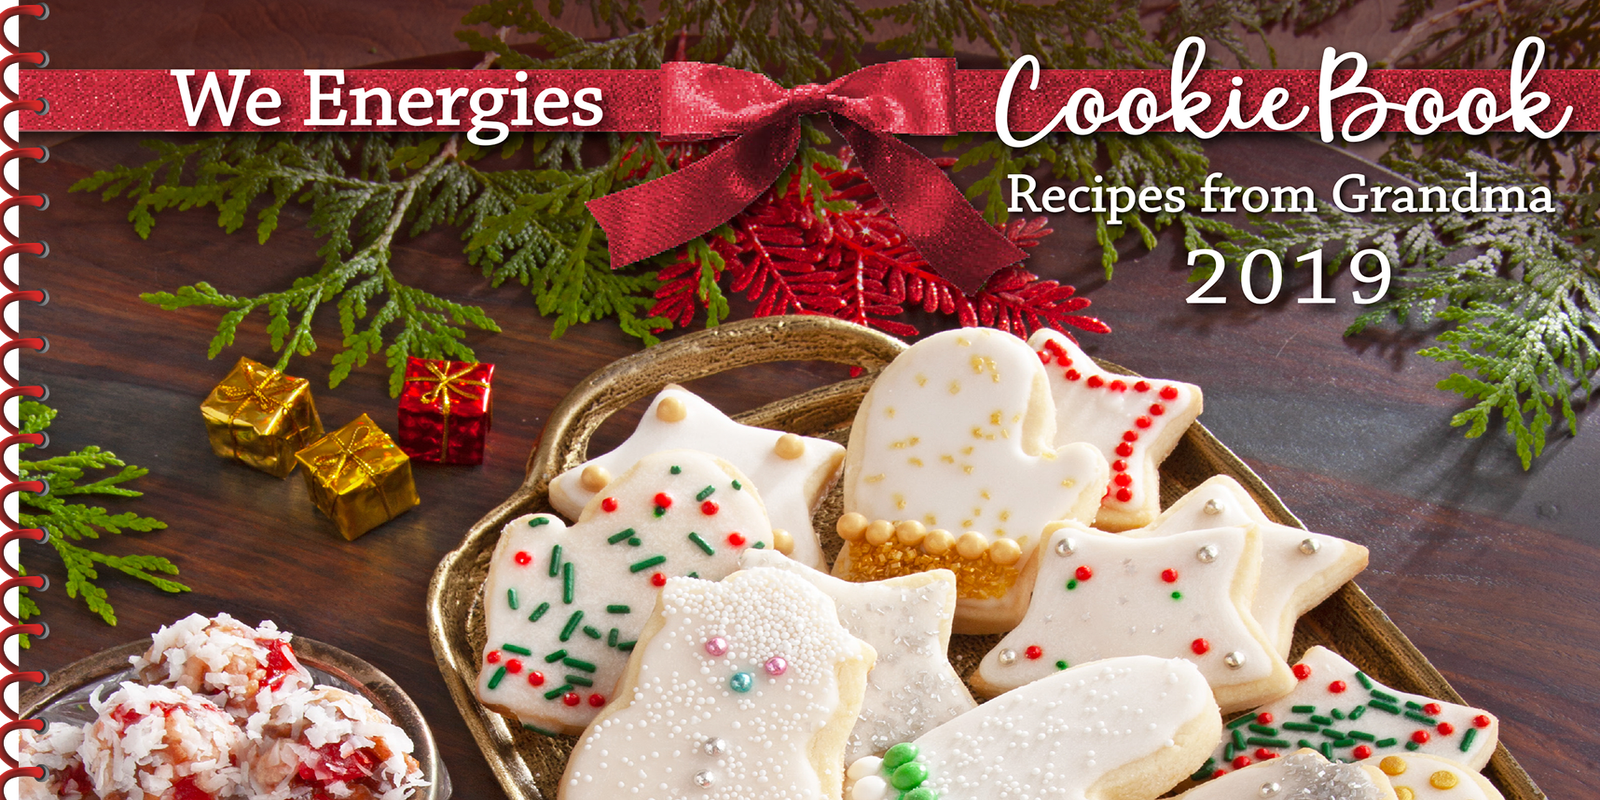 We Energies' annual cookie book honors Grandma with 38 recipes